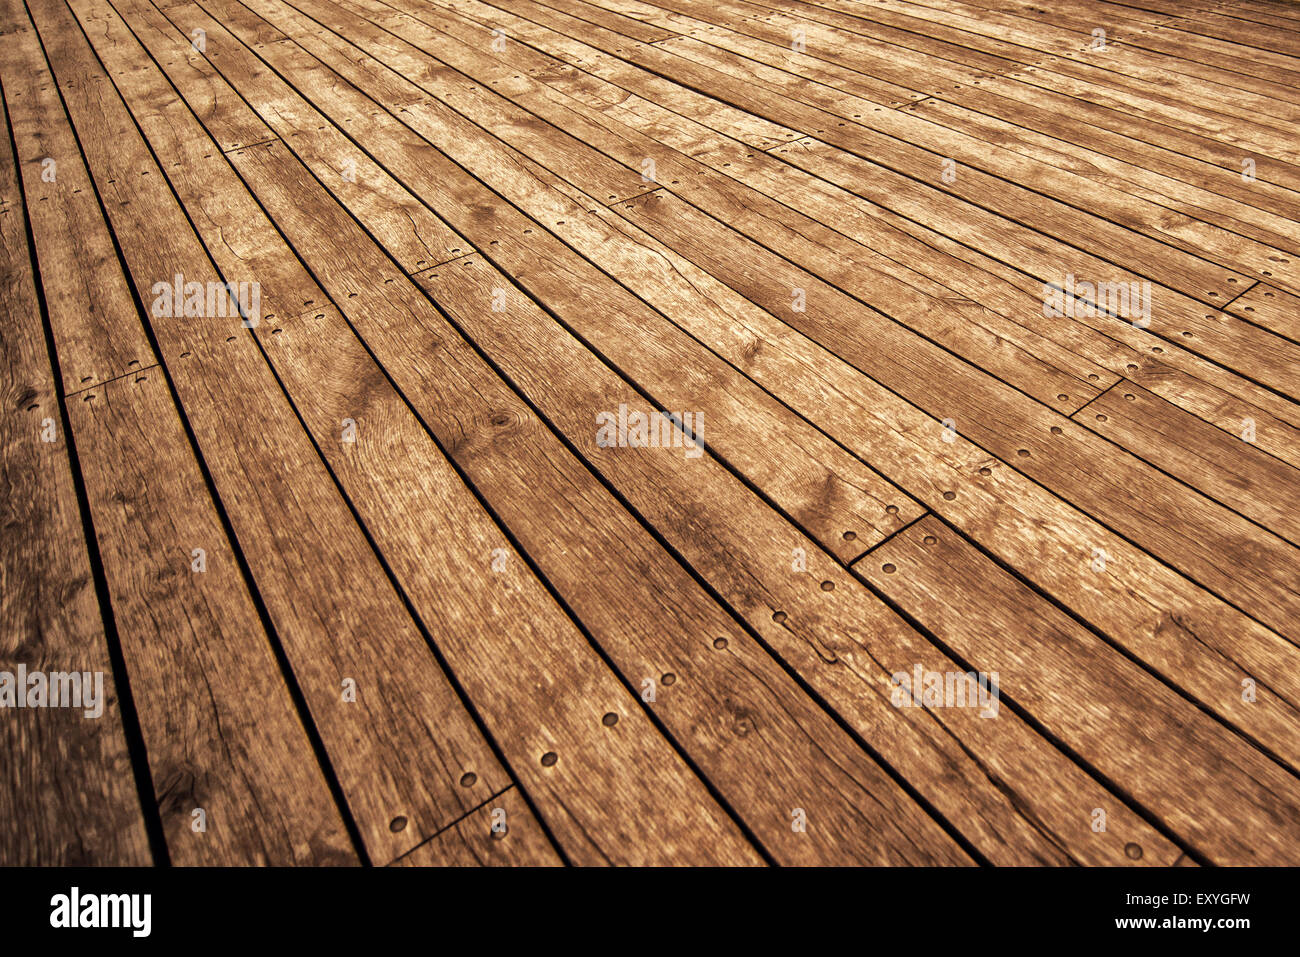 Rustic Wooden Floor Board Texture in Perspective as Background for Product Placement, Warm Tone Stock Photo